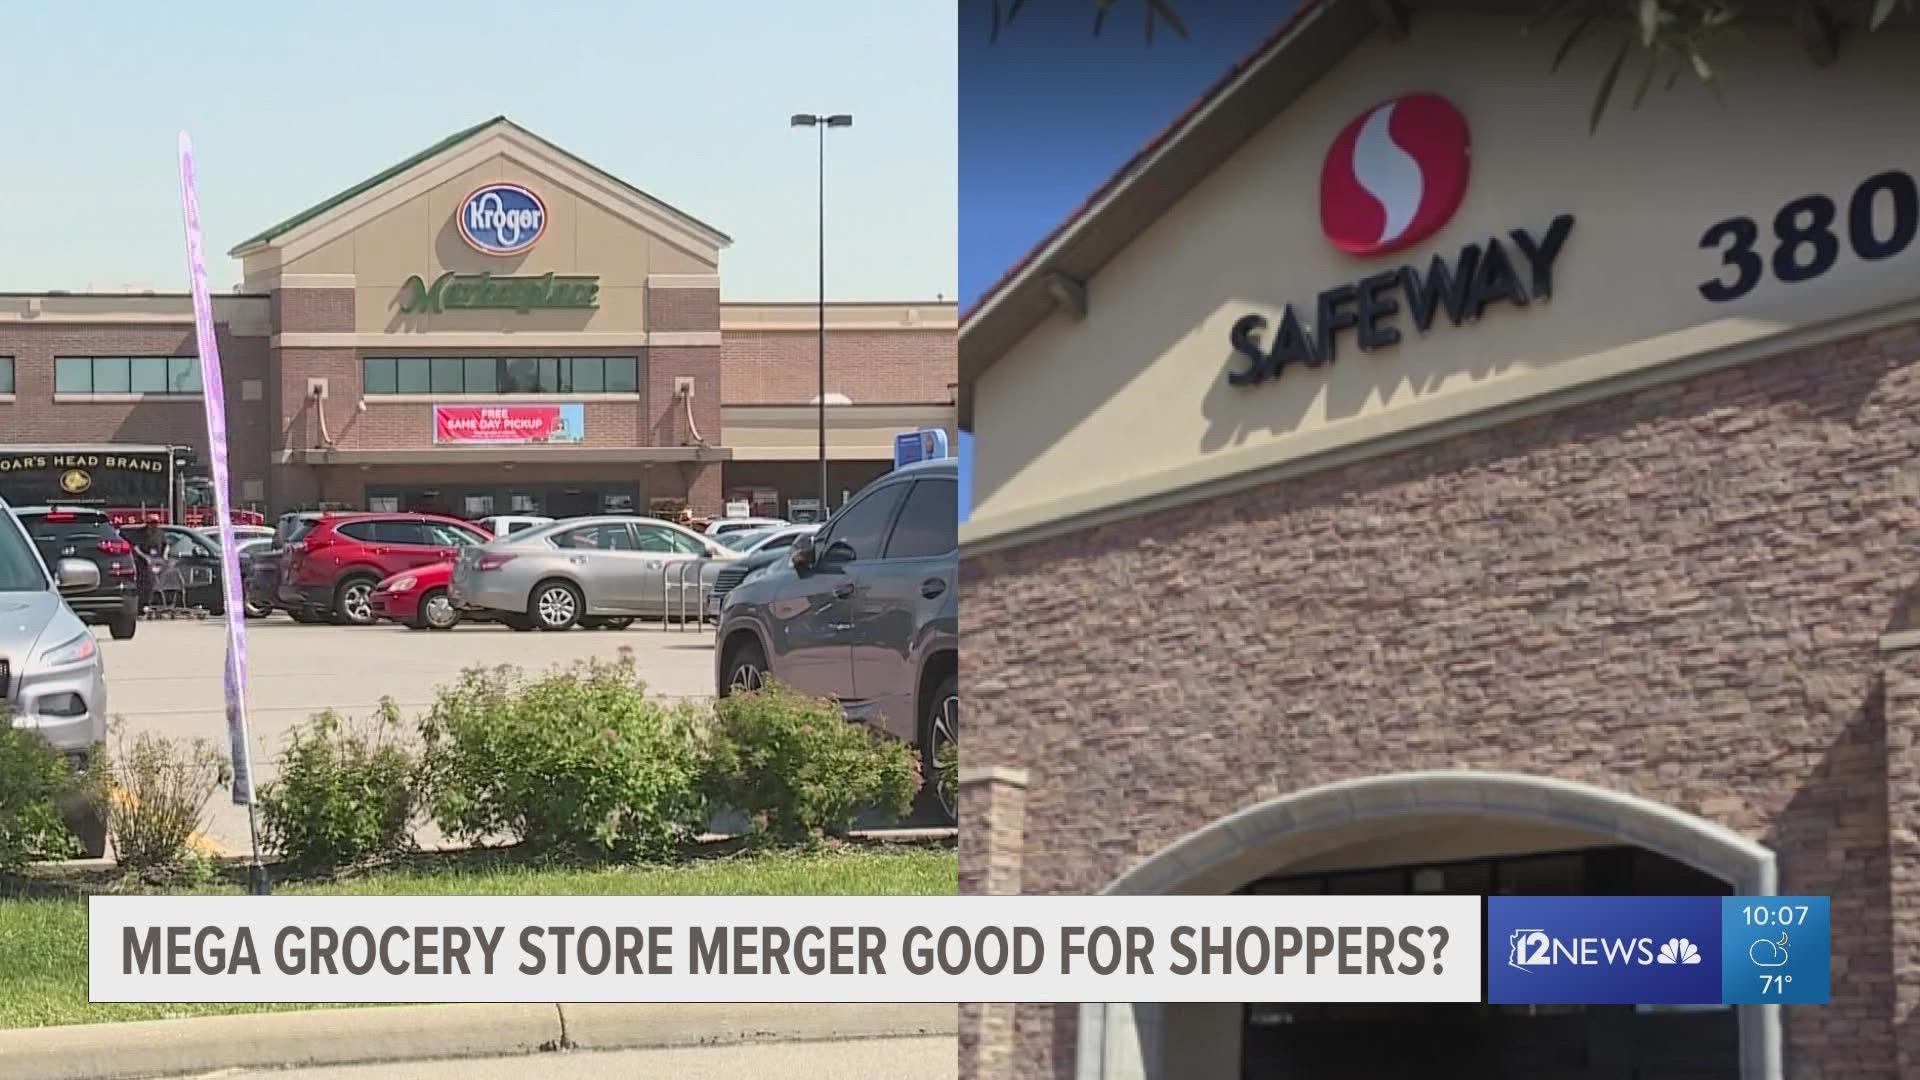 ASU business professor Timothy Bates weighs the pros and cons of the potential mega grocery store merger.